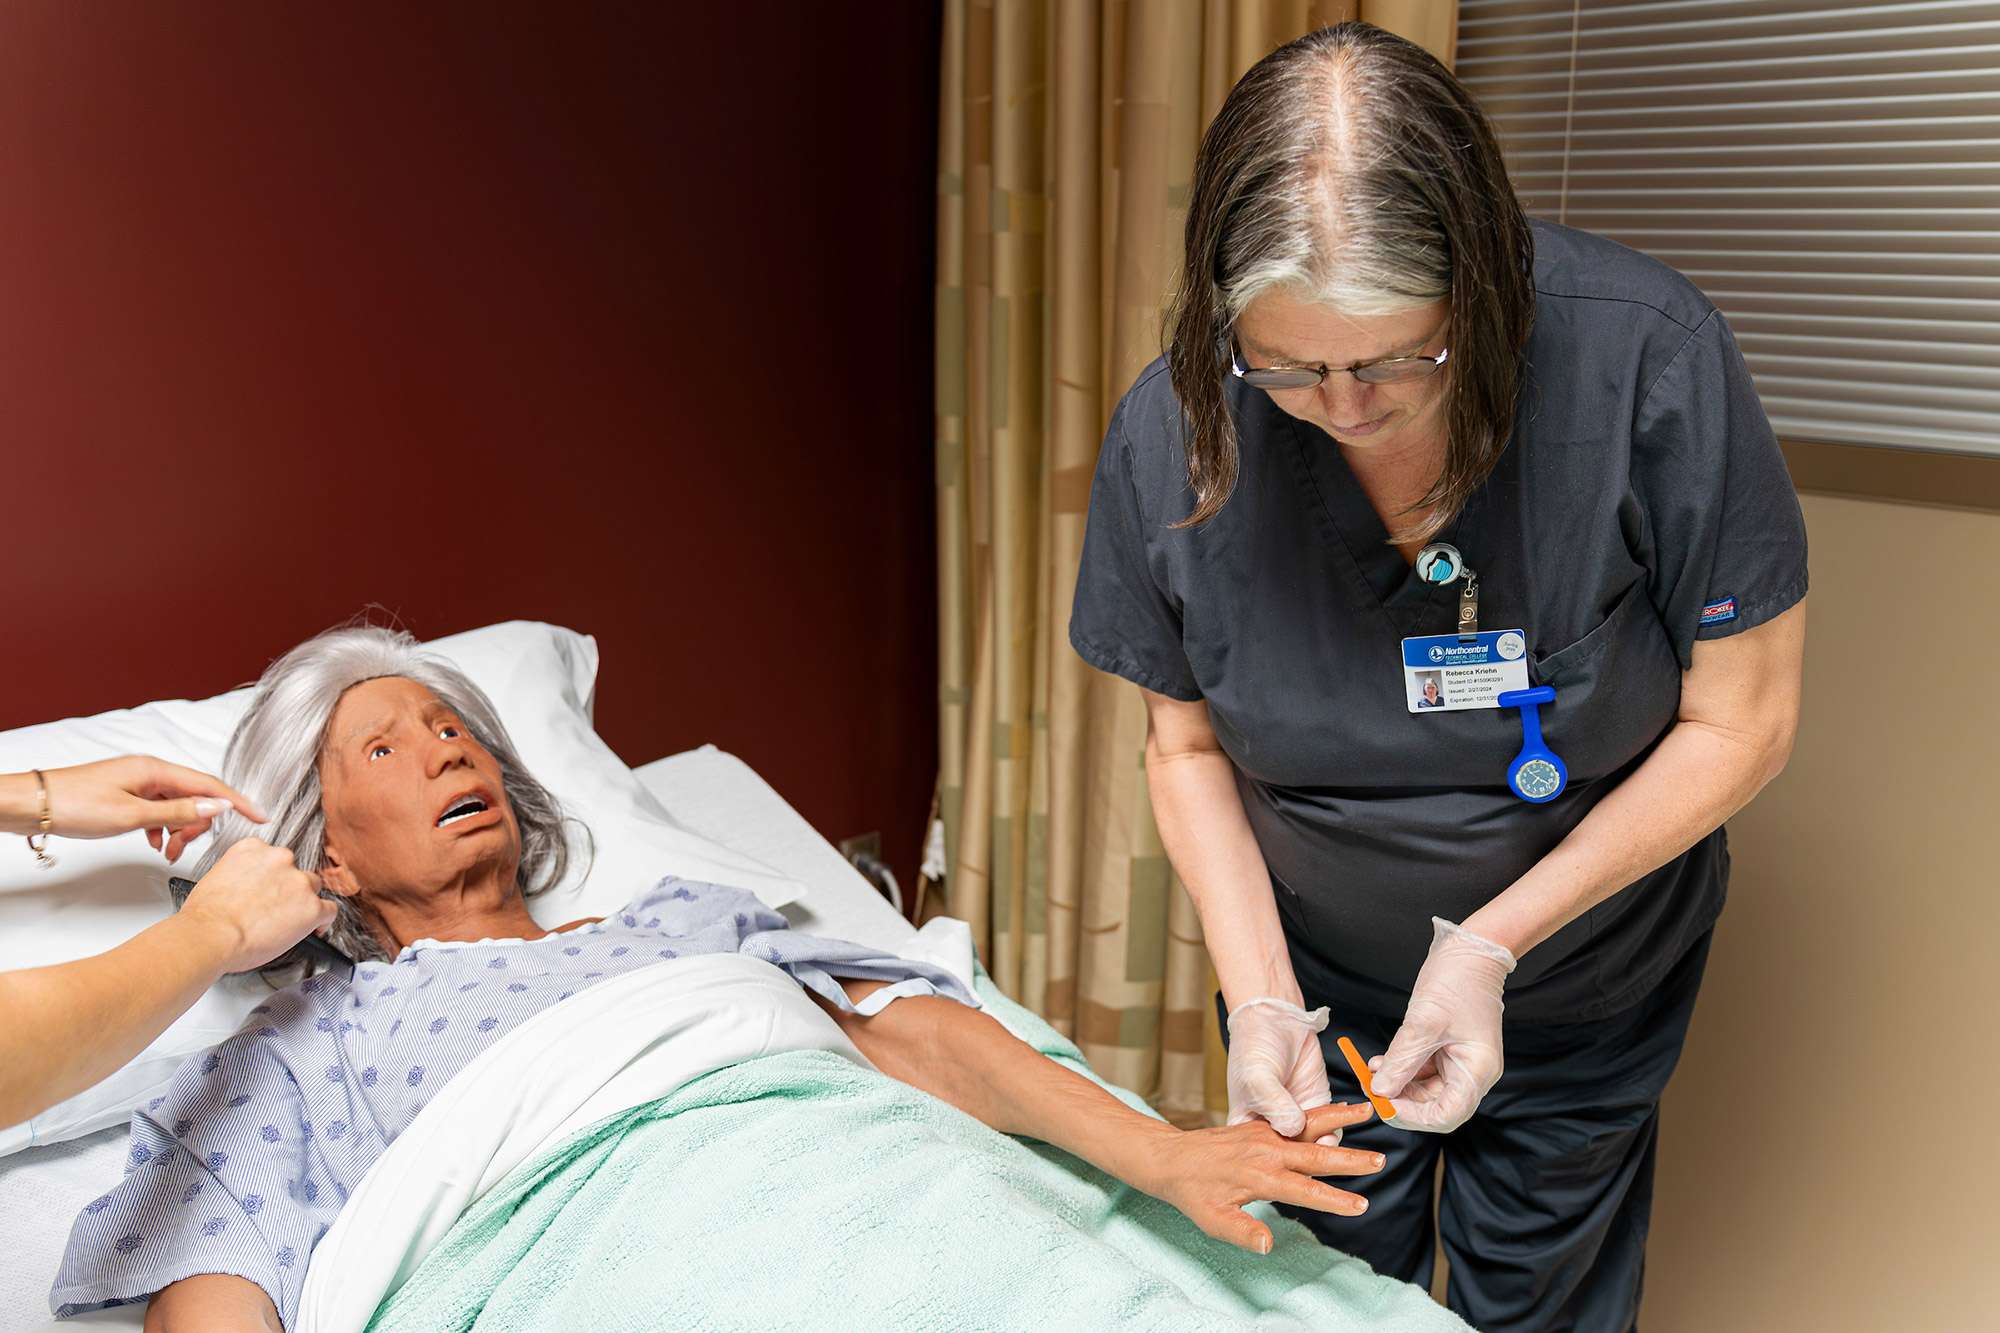 A certified nursing assistant uses a naile filer on the hand of a mannequin